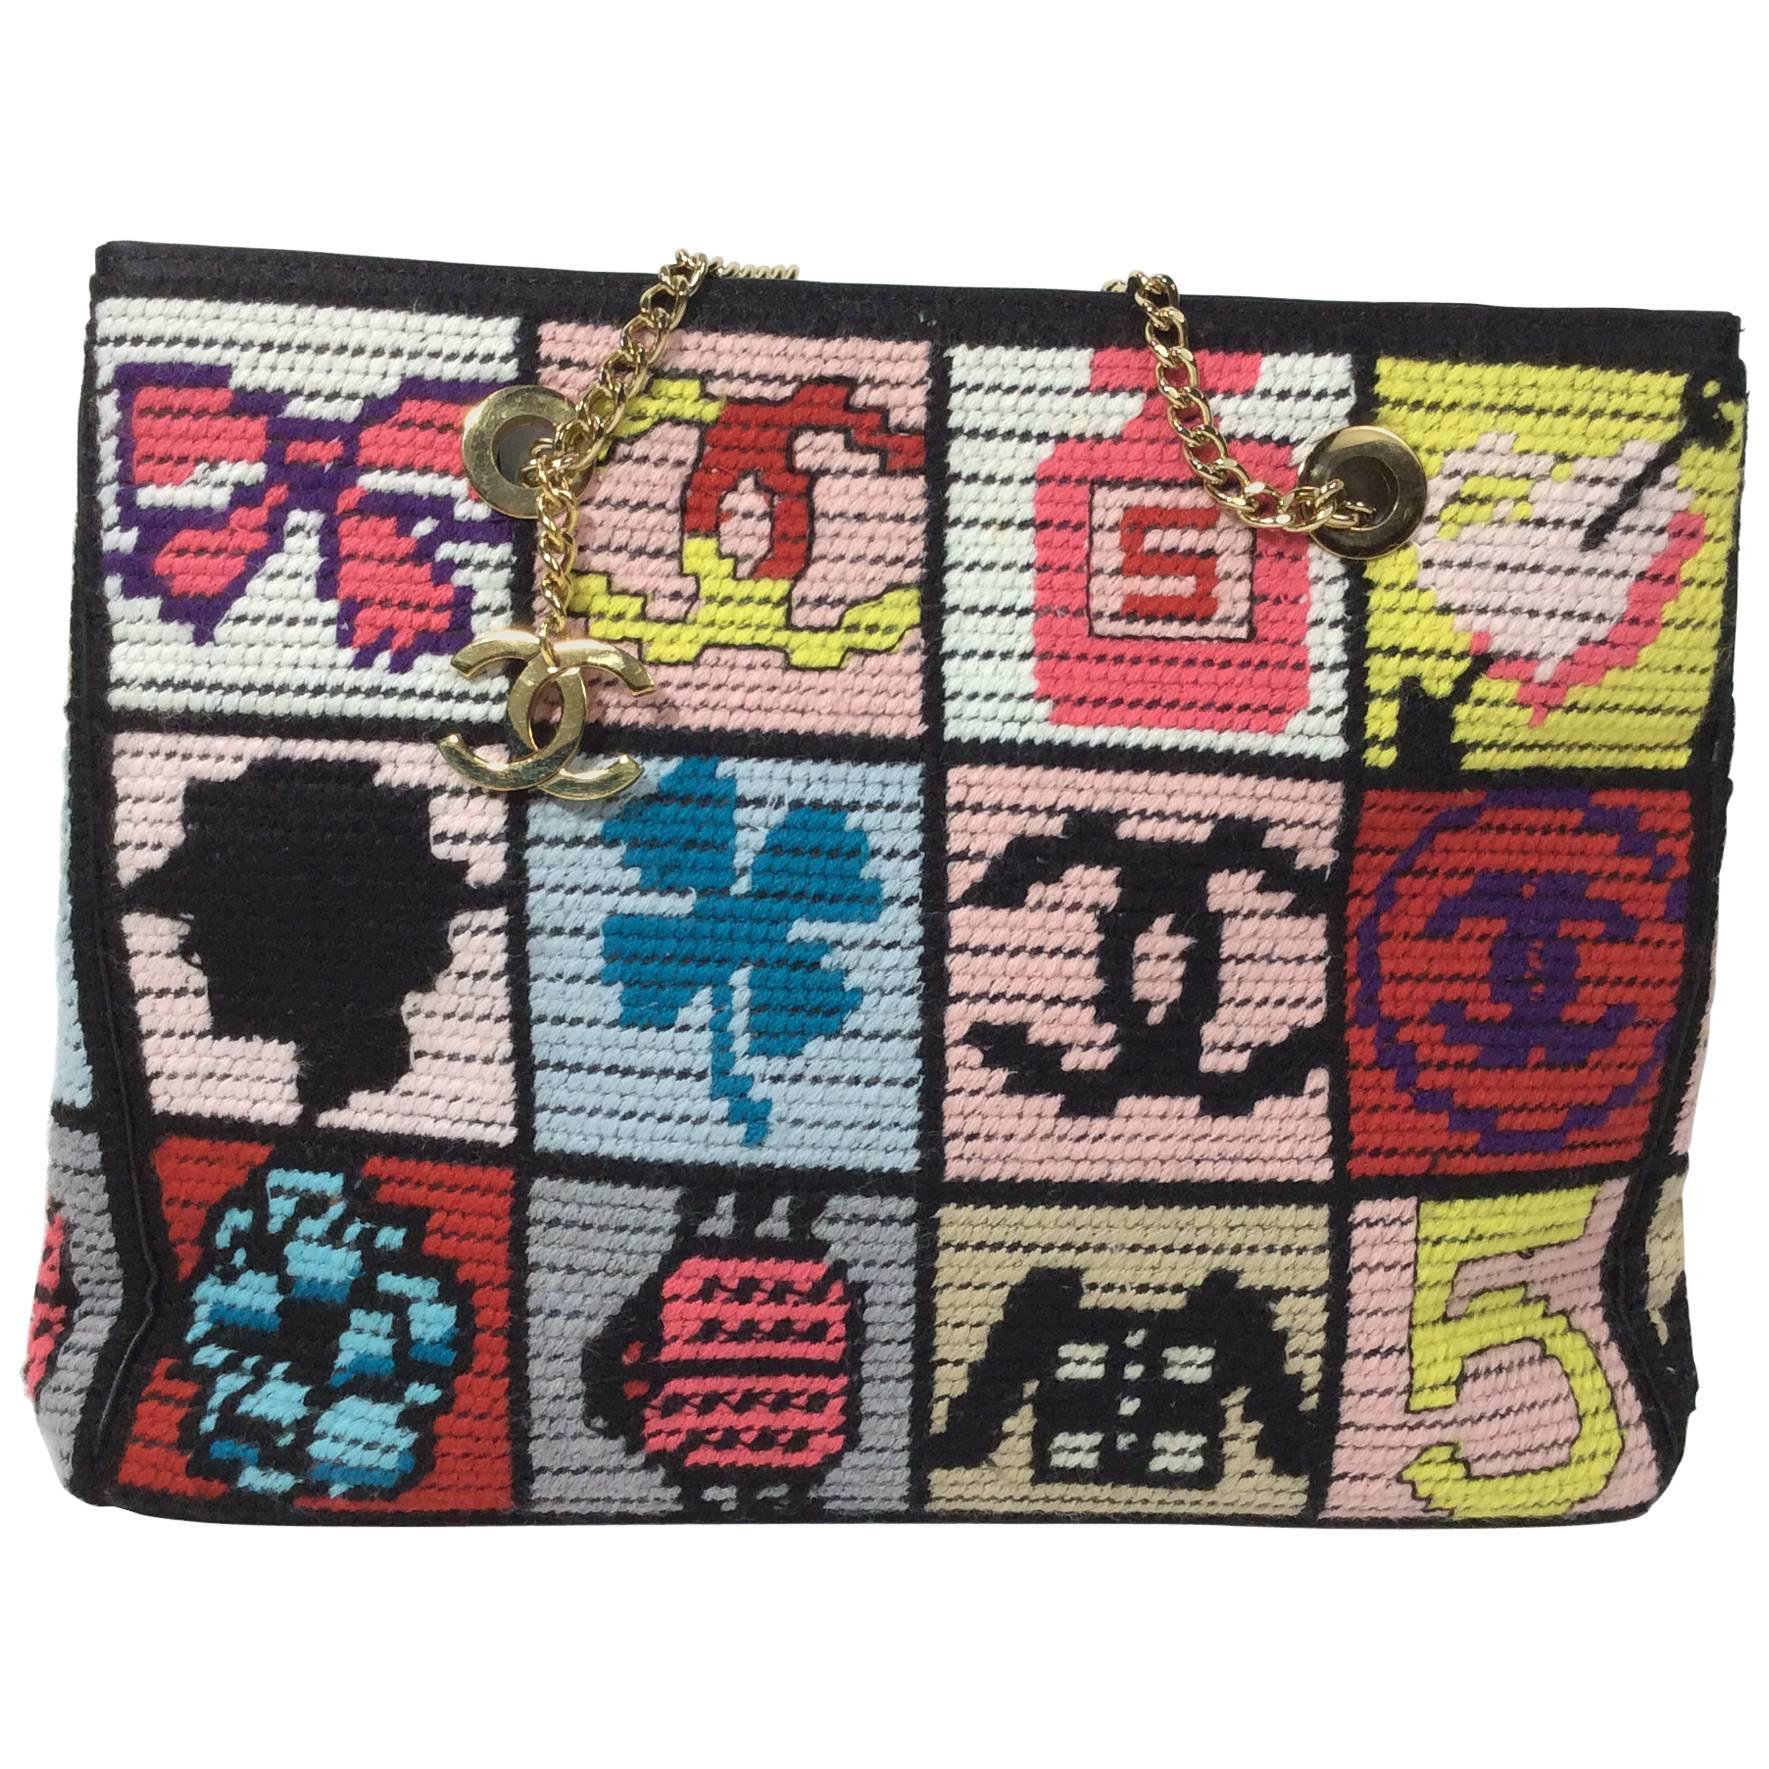 Chanel Precious Symbols Embroidered Patchwork Top Handle Bag (Limited Edition)